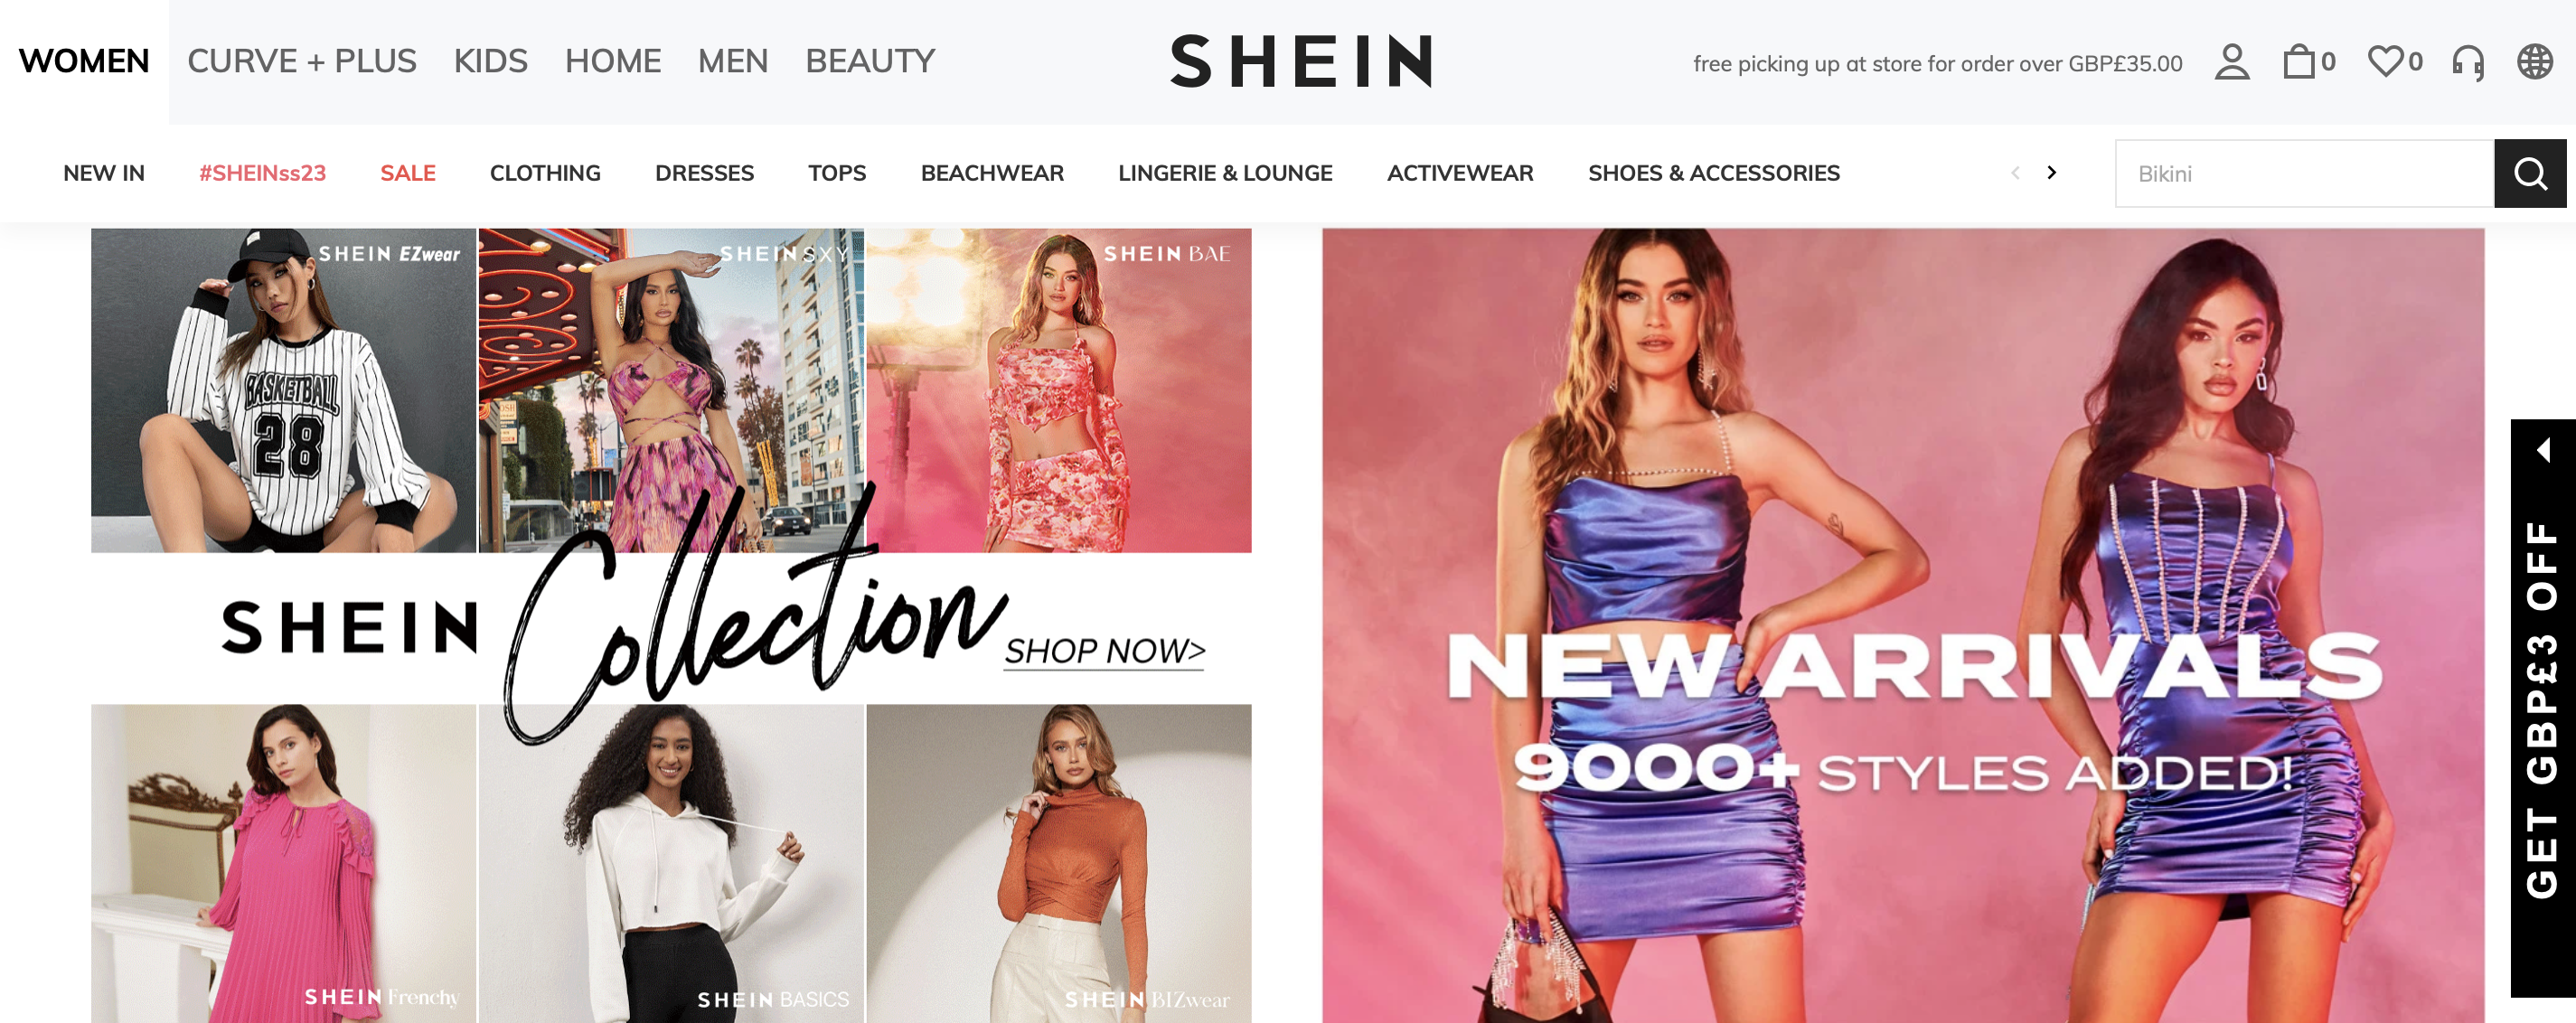 Shein Said to Be Seeking New Round of Financing from Existing Investors, Valuation Adjusted Significantly